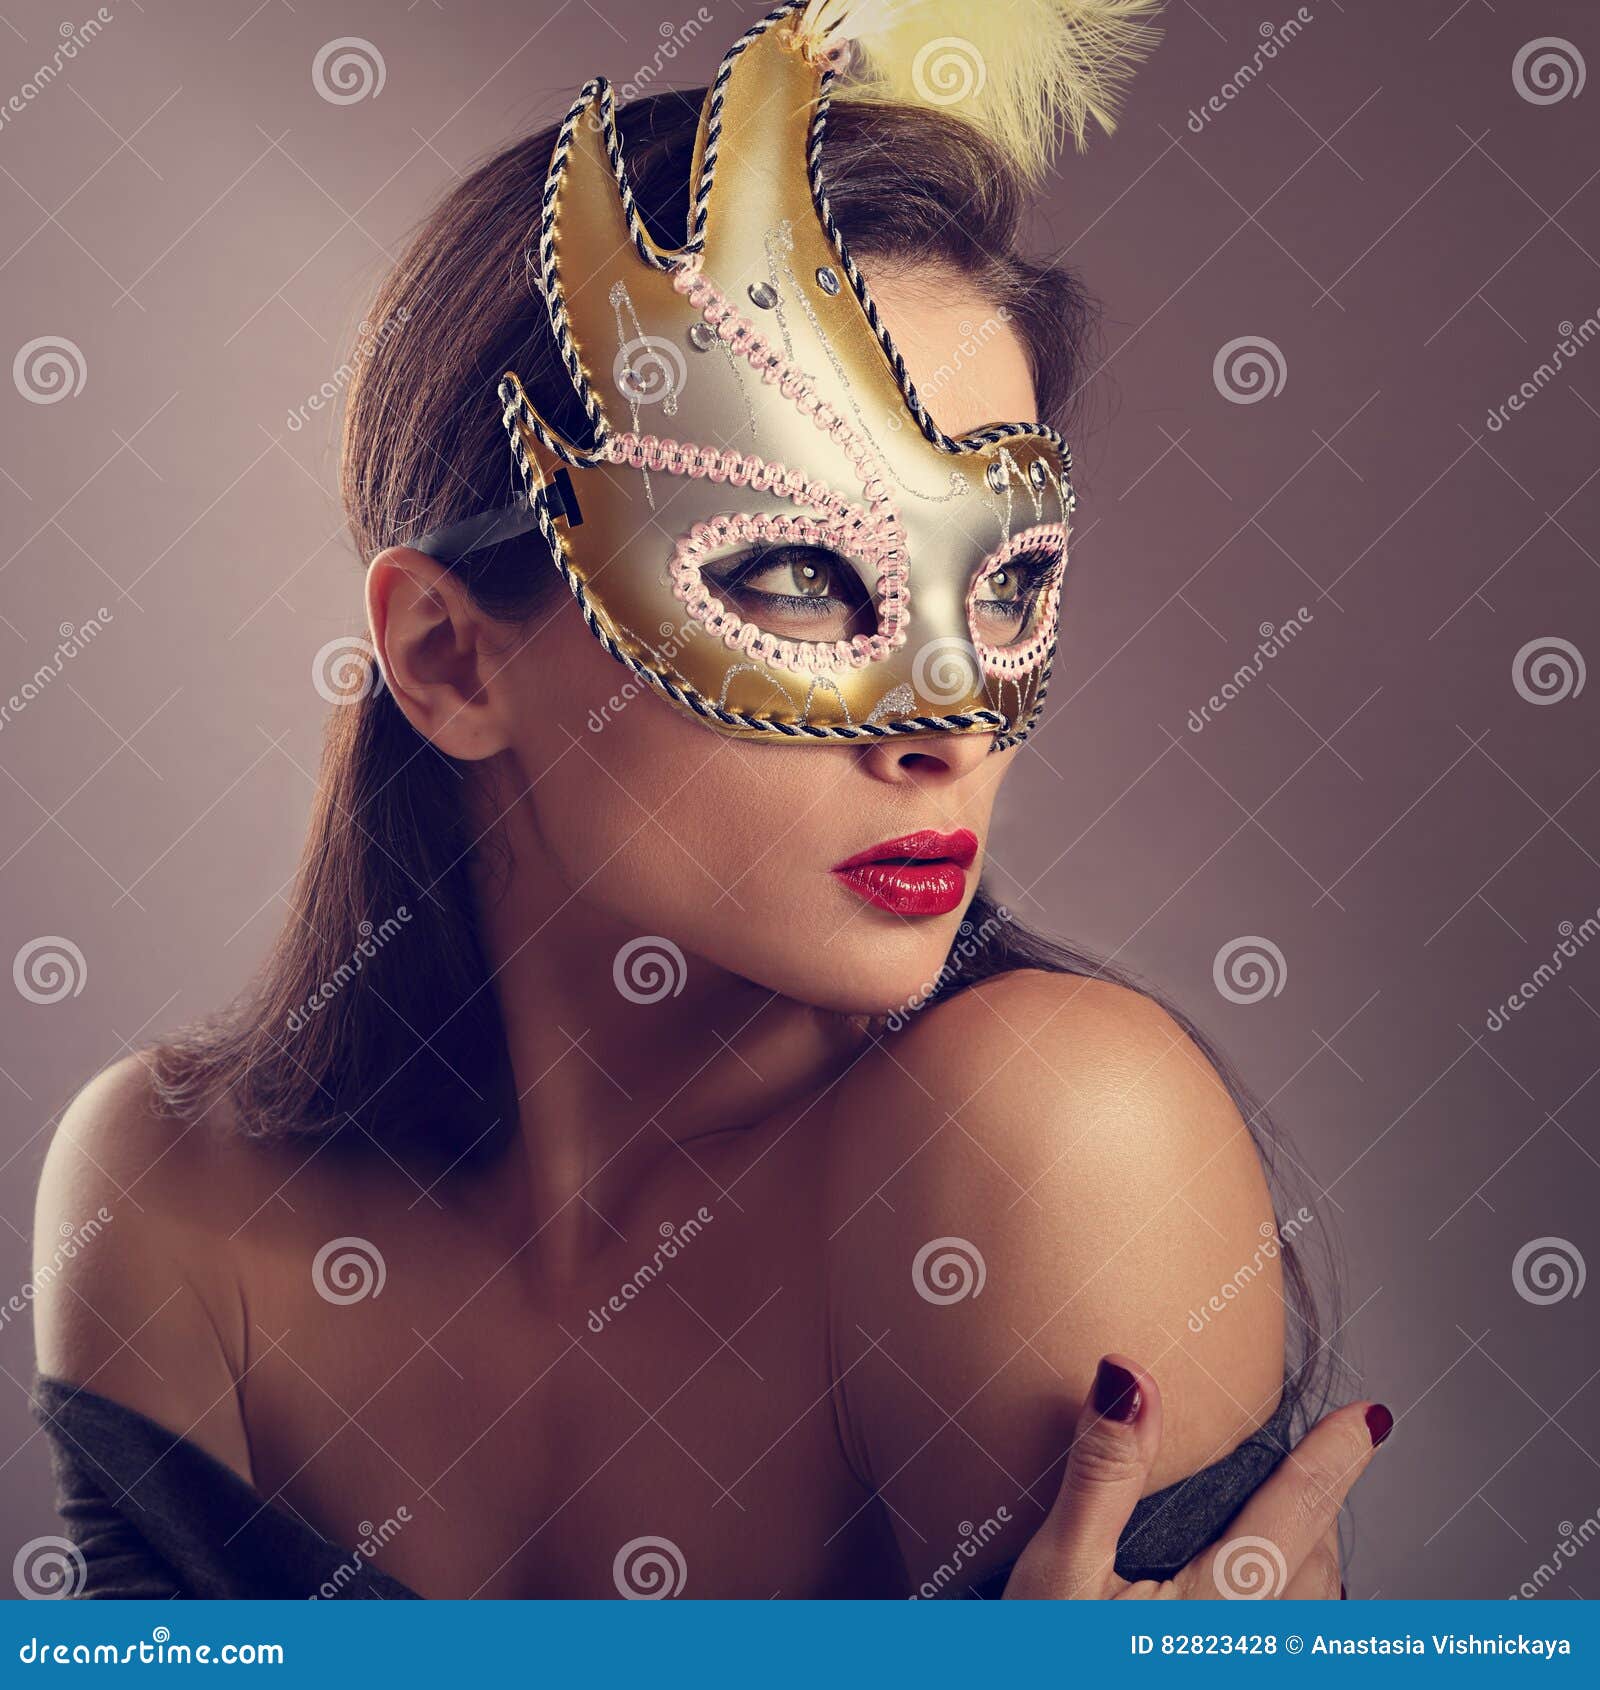 24,942 Carnival Mask Stock Photos Free Stock Photos from Dreamstime